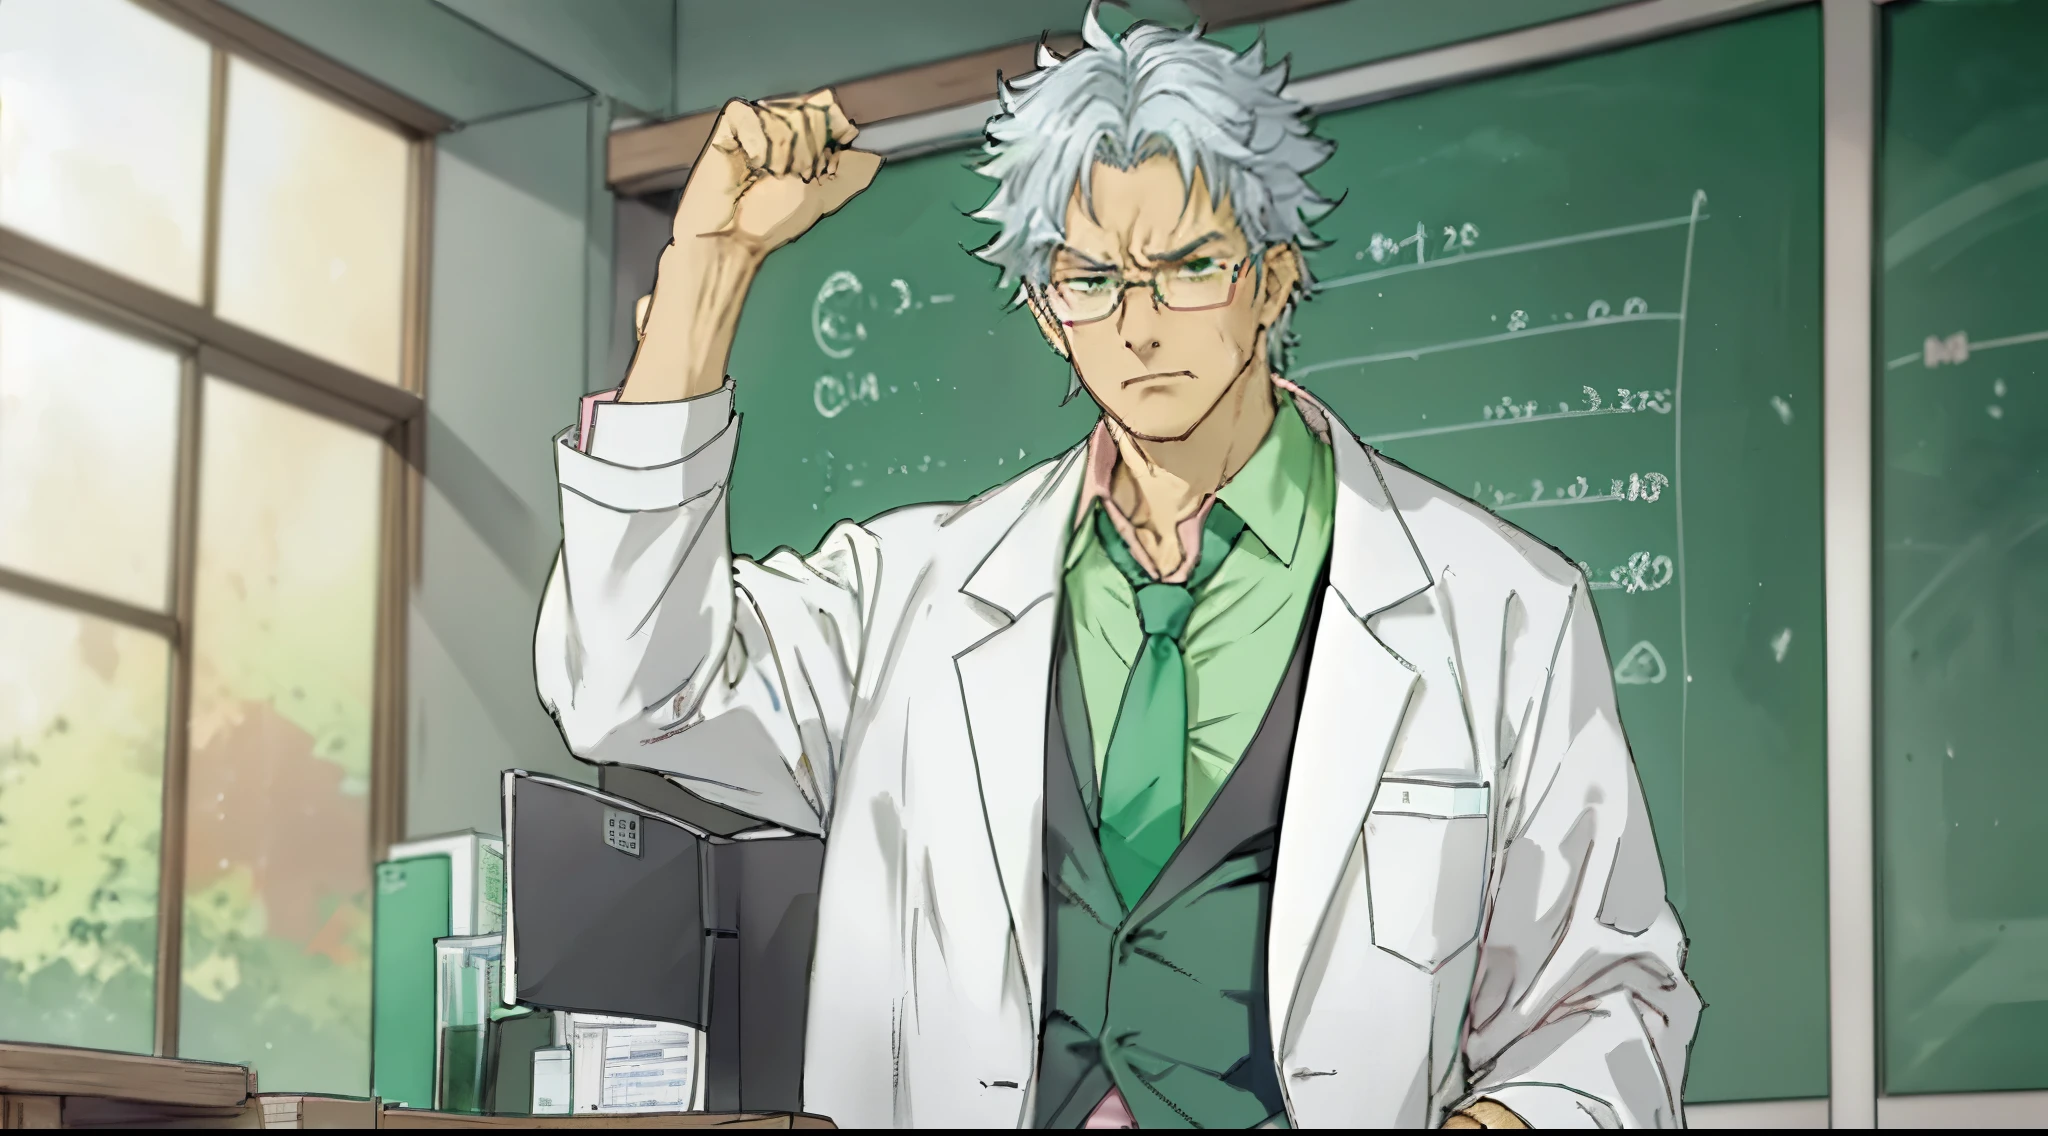 a teacher with a gray hair, he is wearing medical glasses, a lab coat, a green tie and a pink shirt, he is angry and pissed off, he is doing a facepalm